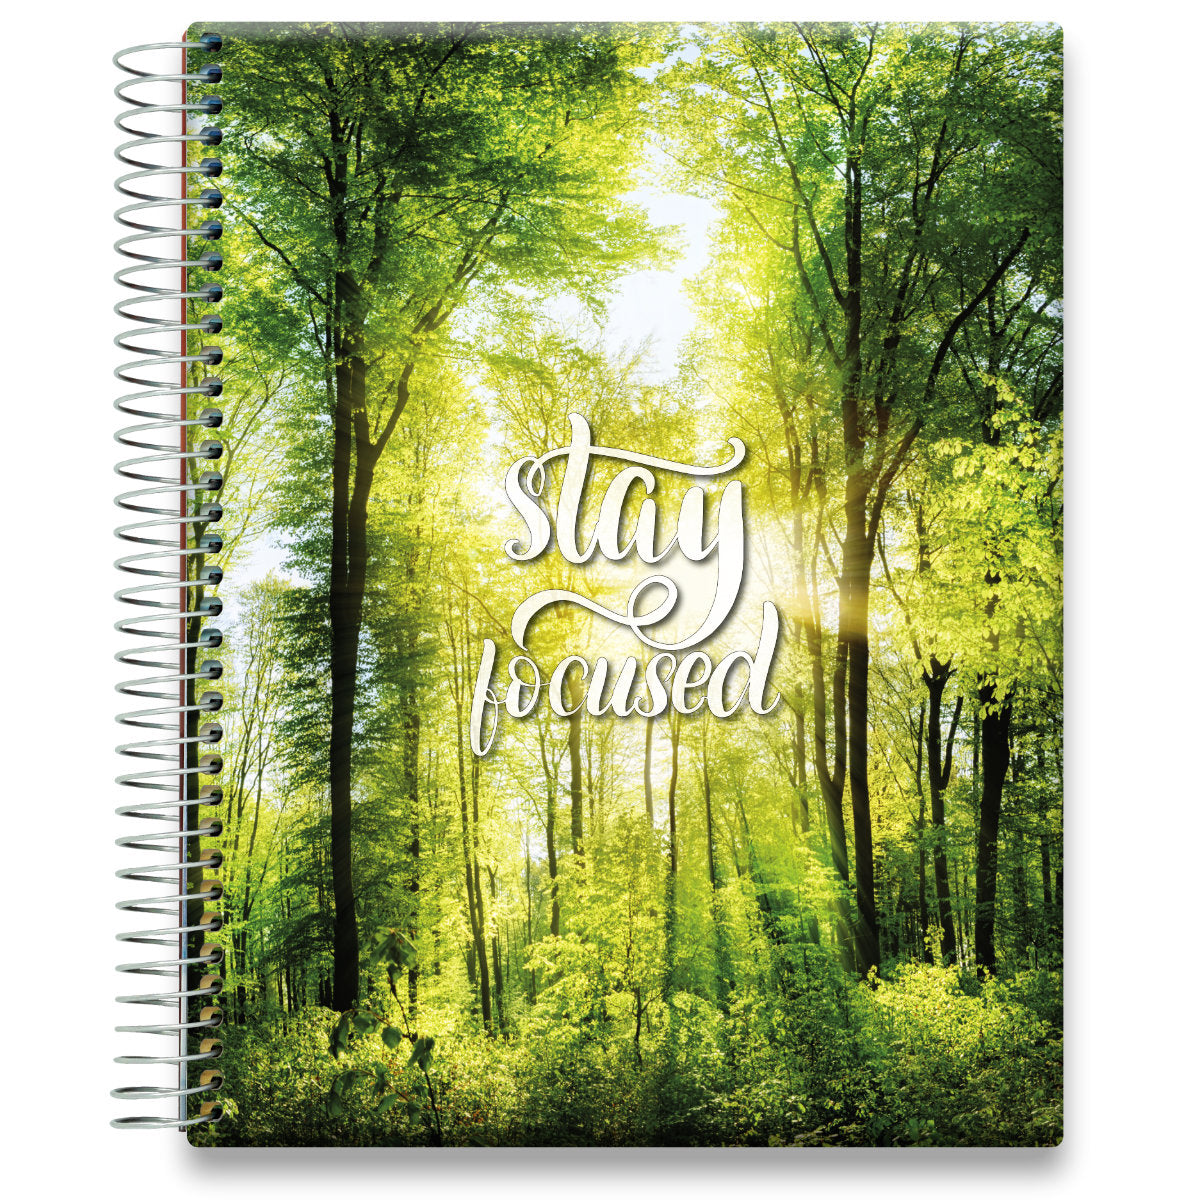 Oct 2024 to Dec 2025 Planner - Stay Focused Forest